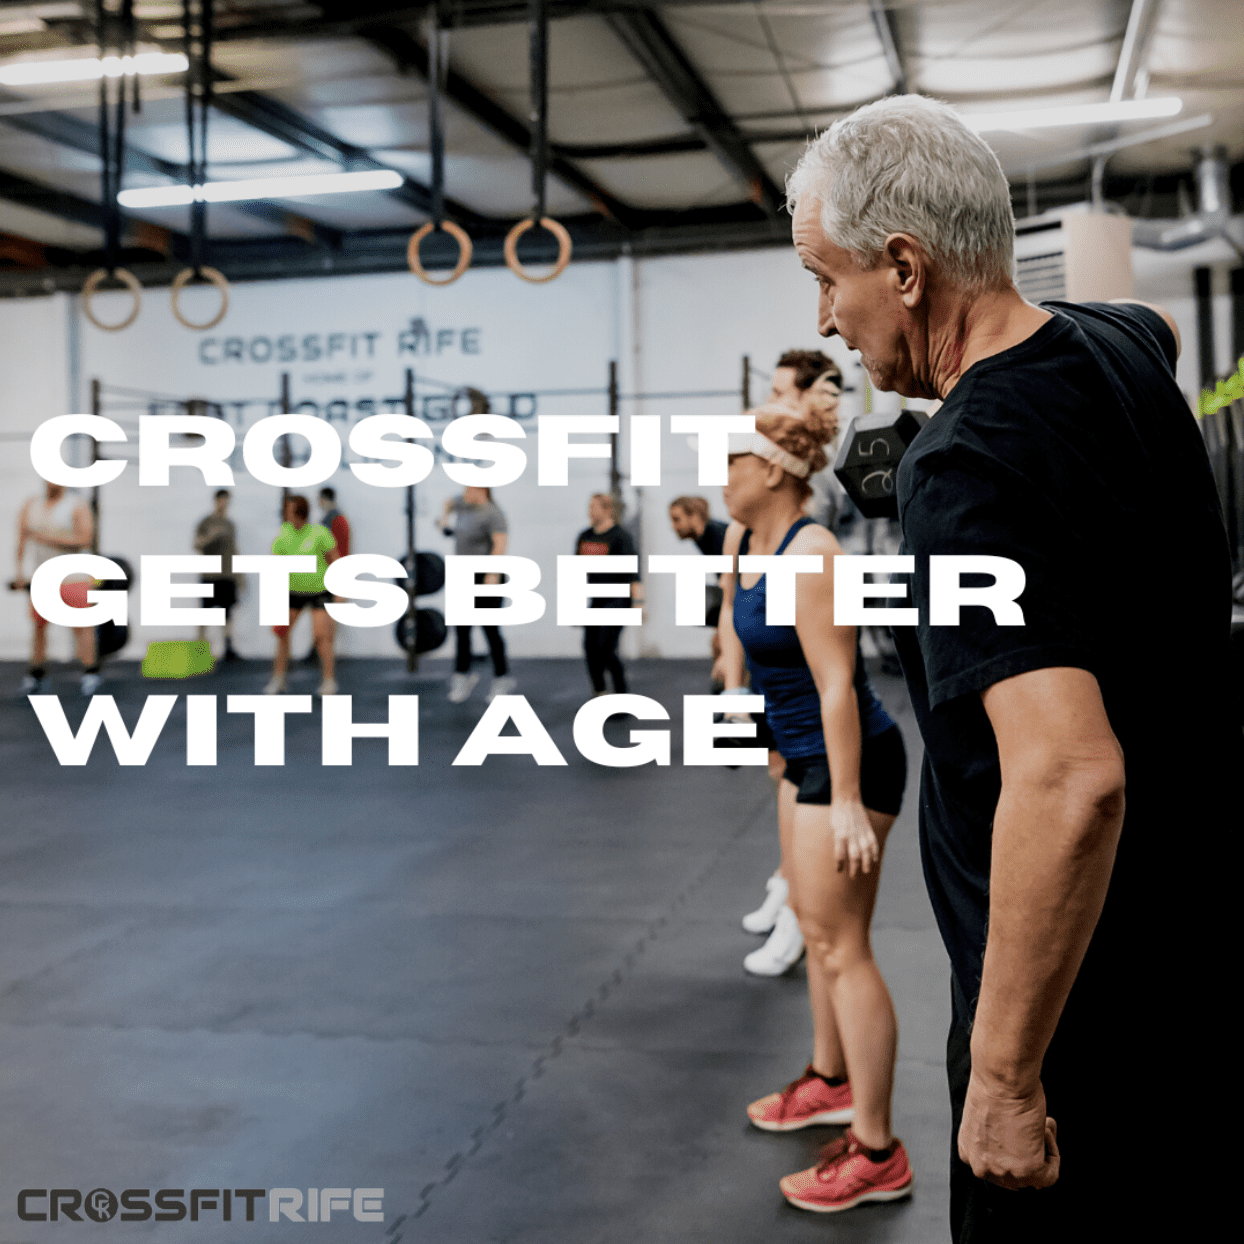 Does CrossFit Get Better With Age?